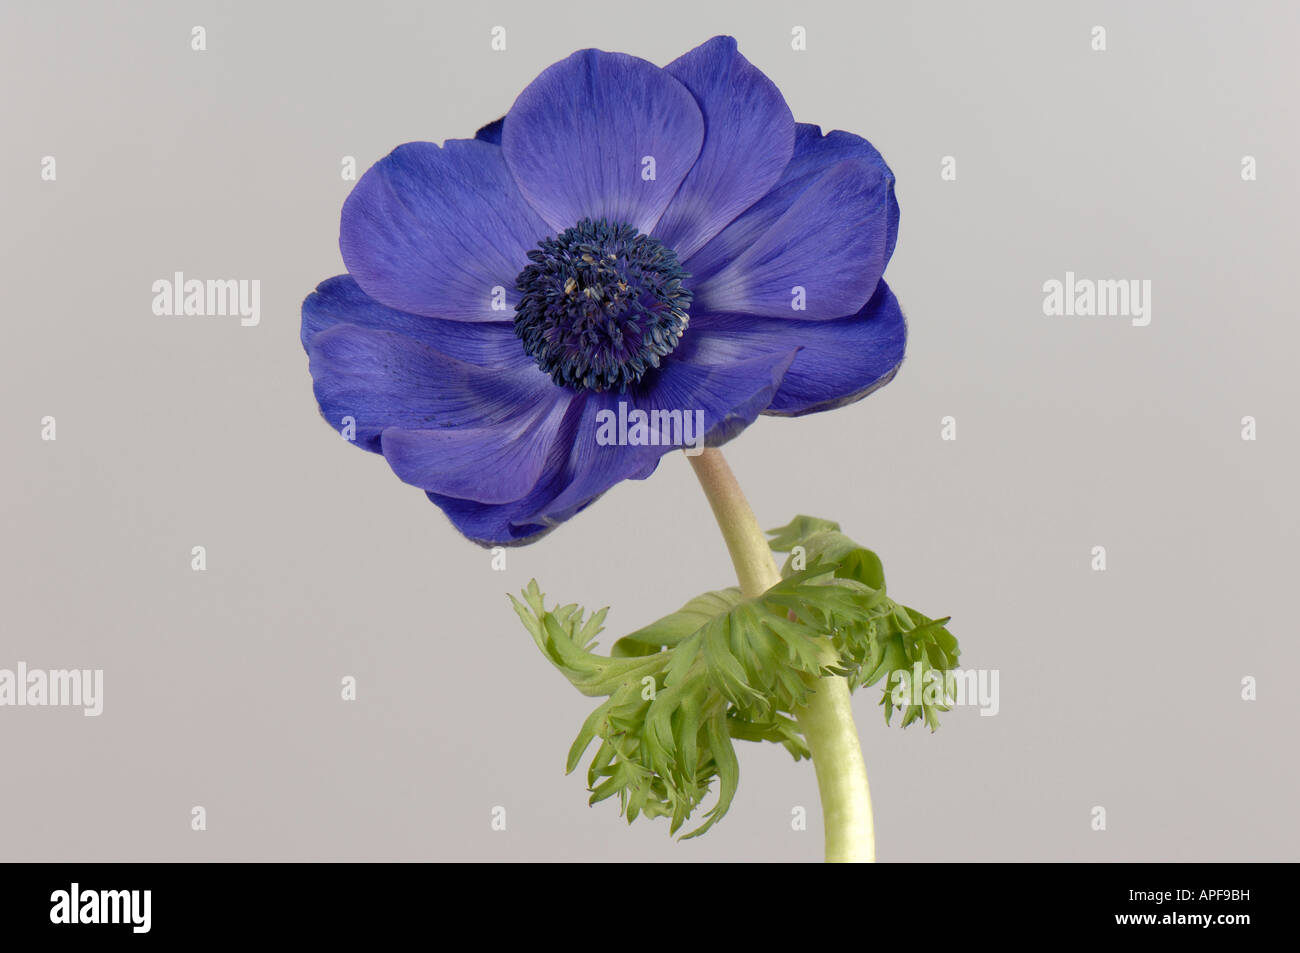 Blue cut flower of Anemone coronaria showing corolla and normal calyx Stock Photo